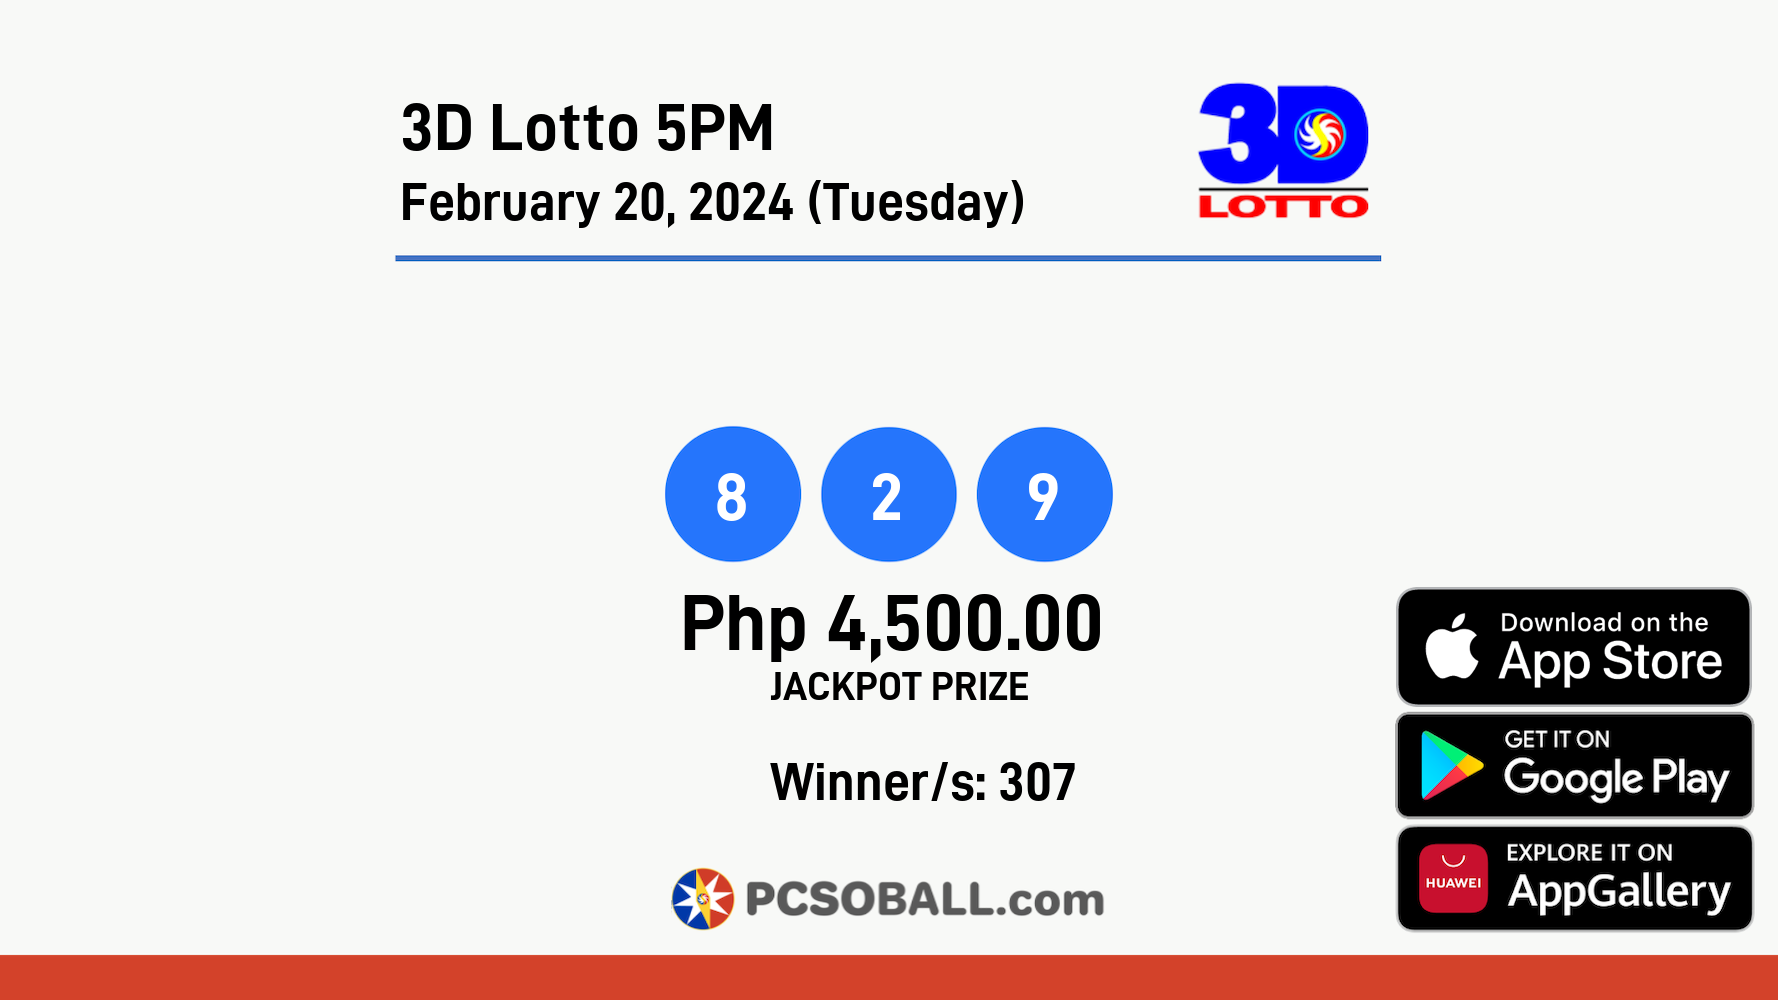 3D Lotto 5PM February 20, 2024 (Tuesday) Result